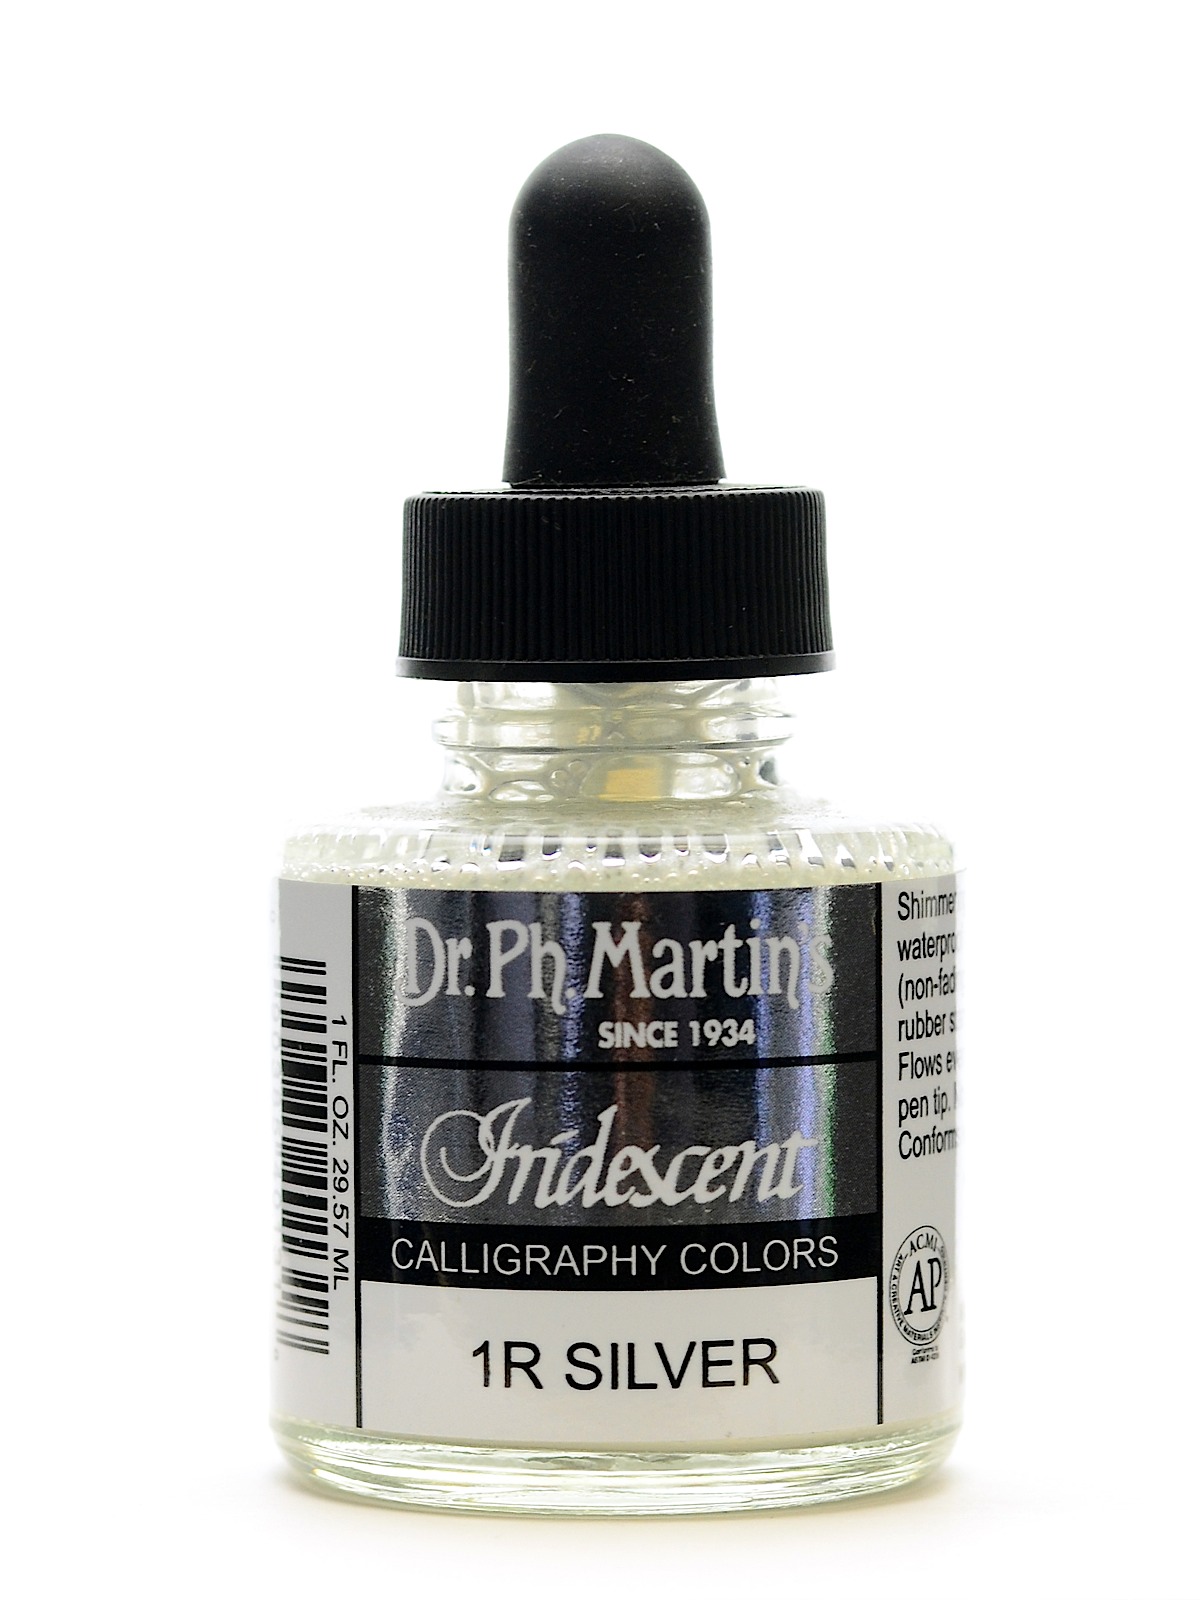 Iridescent Calligraphy Colors 1 Oz. Silver